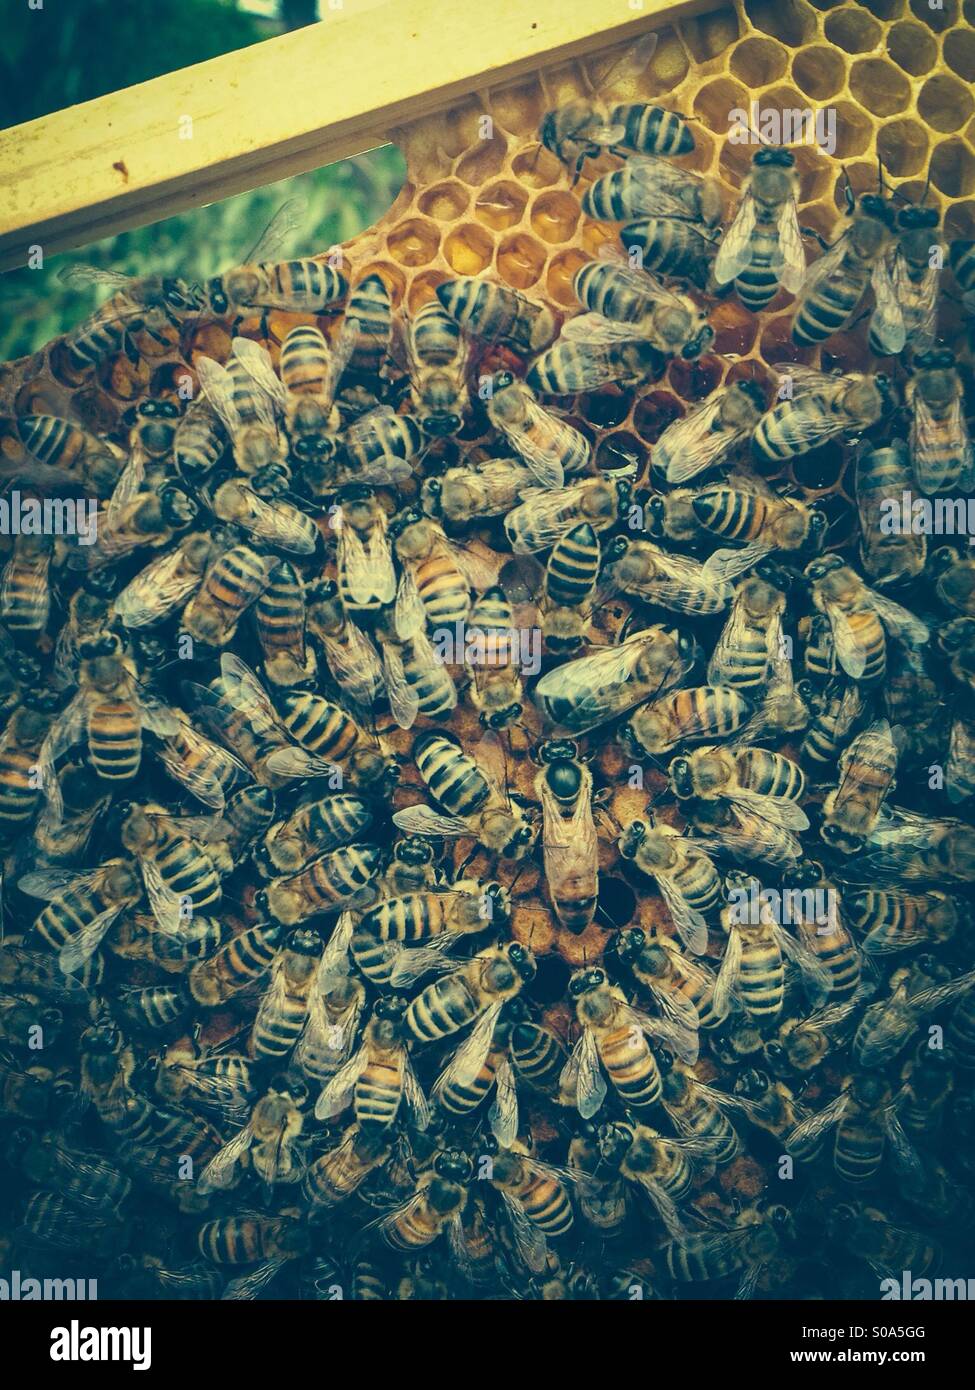 Honey bee queen surrounded by worker bees on a honeycomb frame. Stock Photo